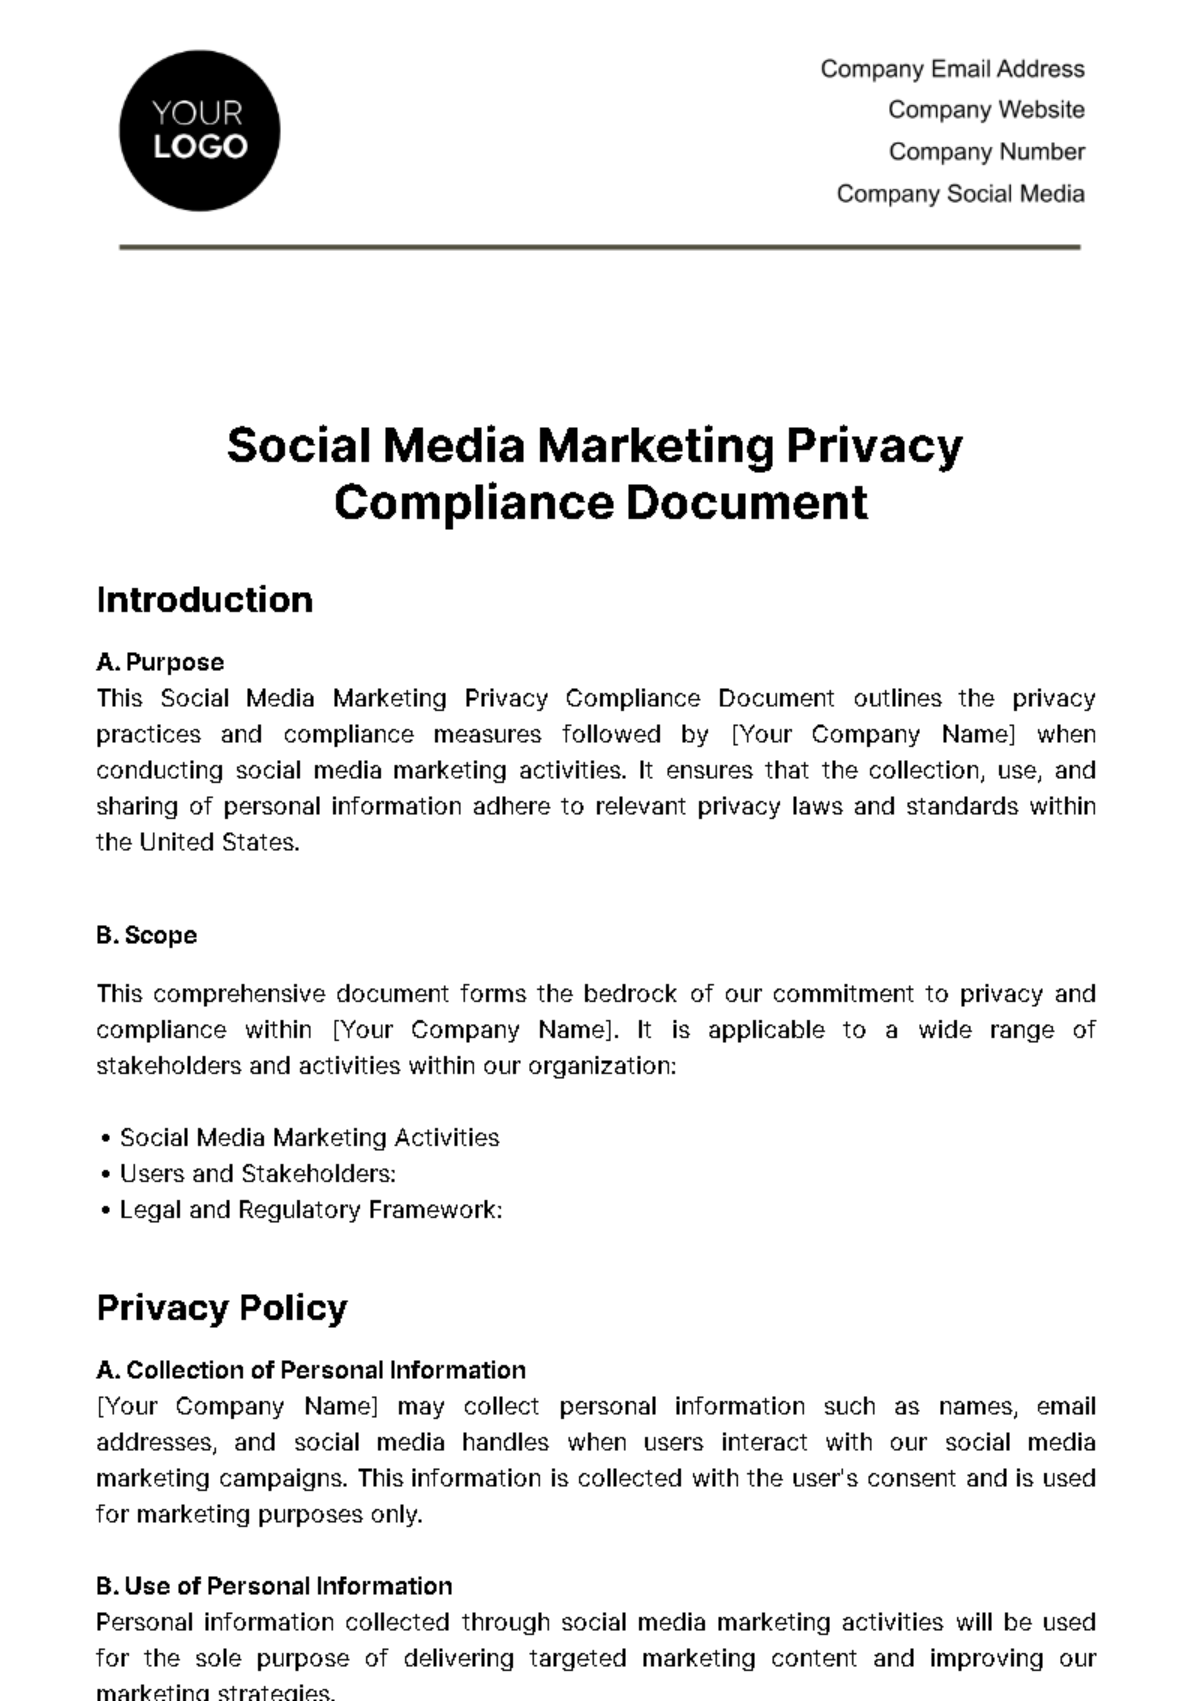 Social Media Marketing Privacy Compliance Document Template